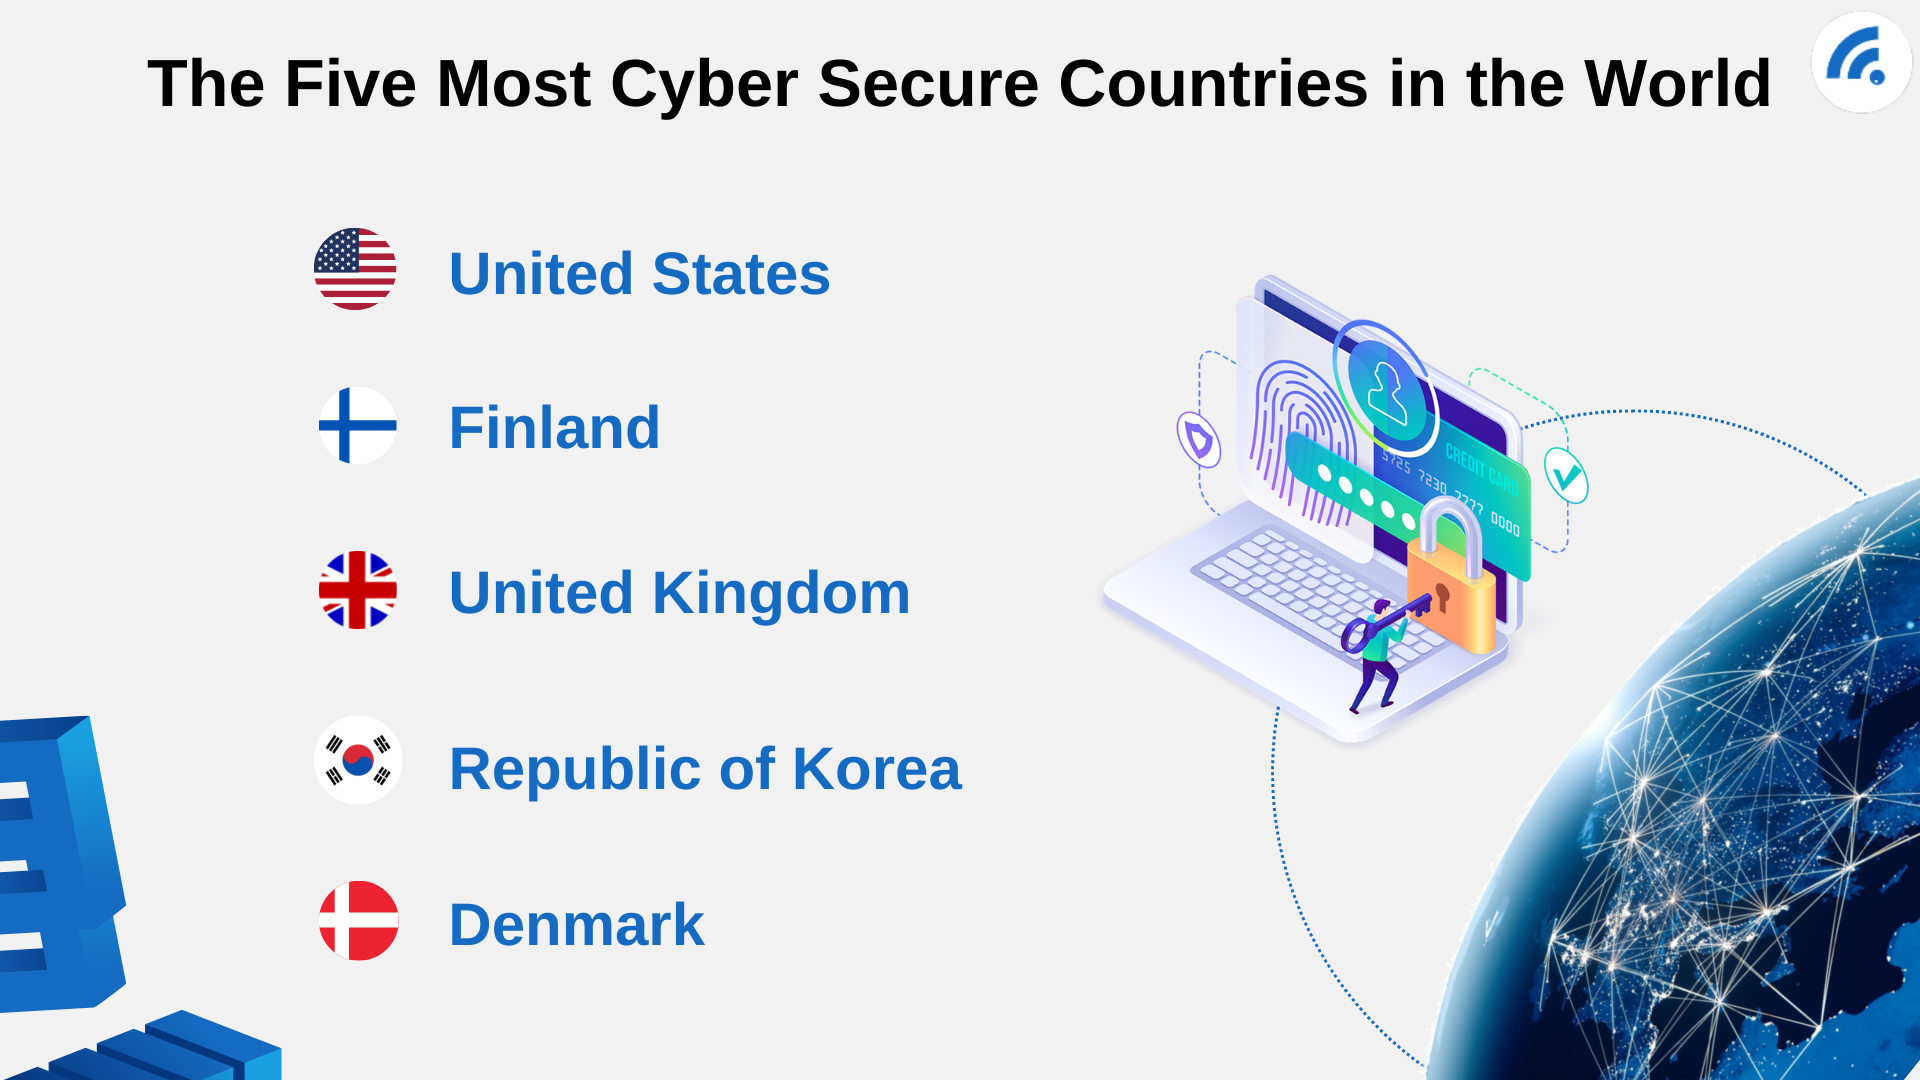 Which country is number 1 in cybersecurity?